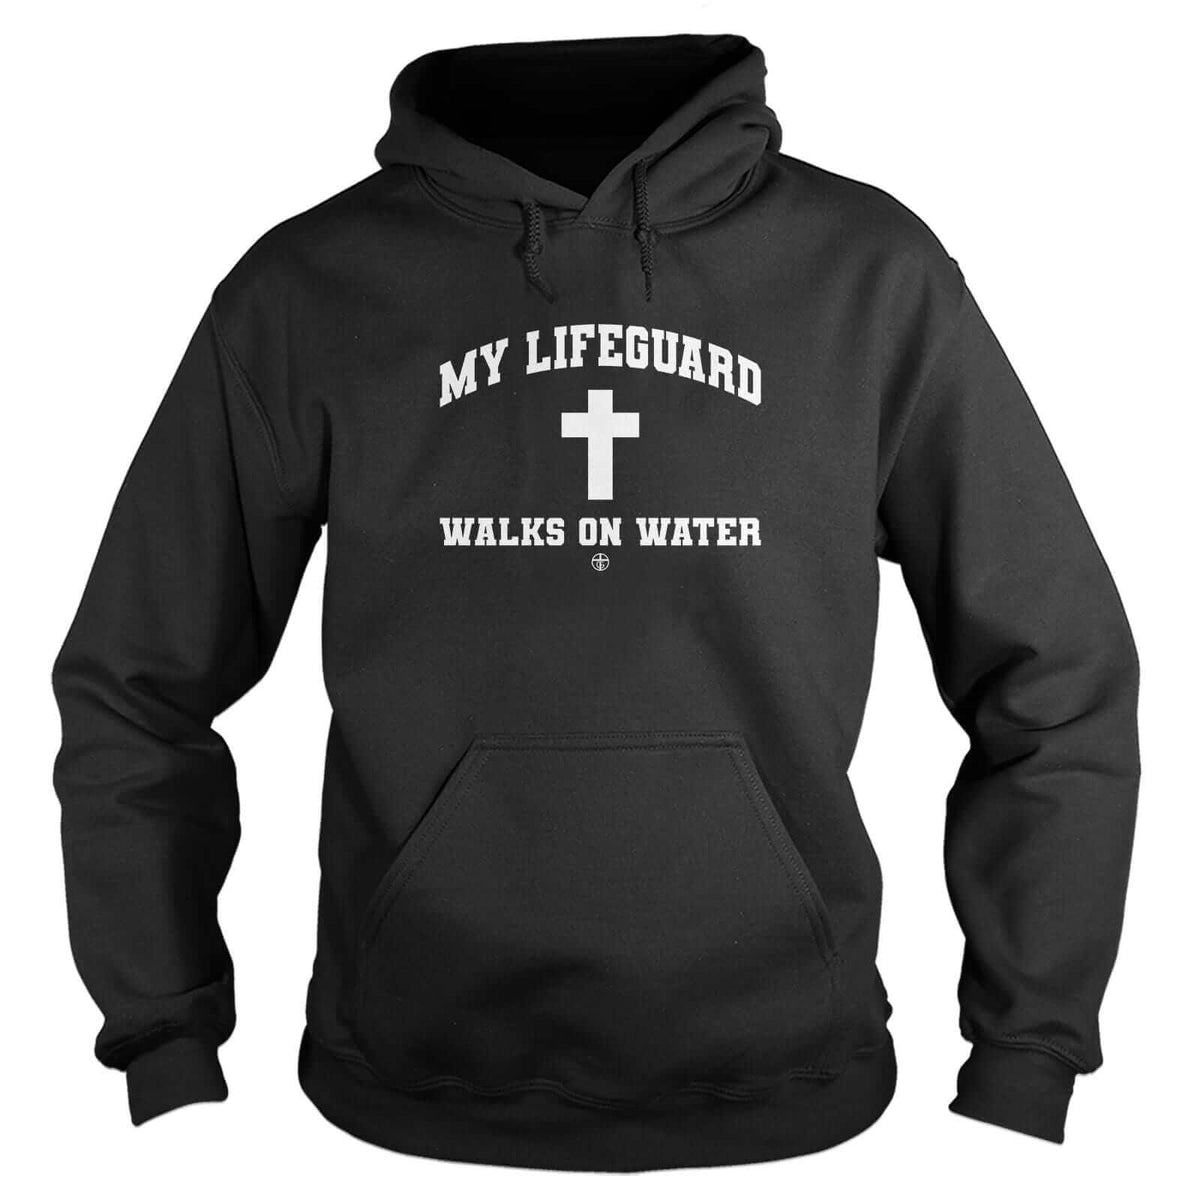 My Lifeguard Walks on Water Hoodie - Our True God